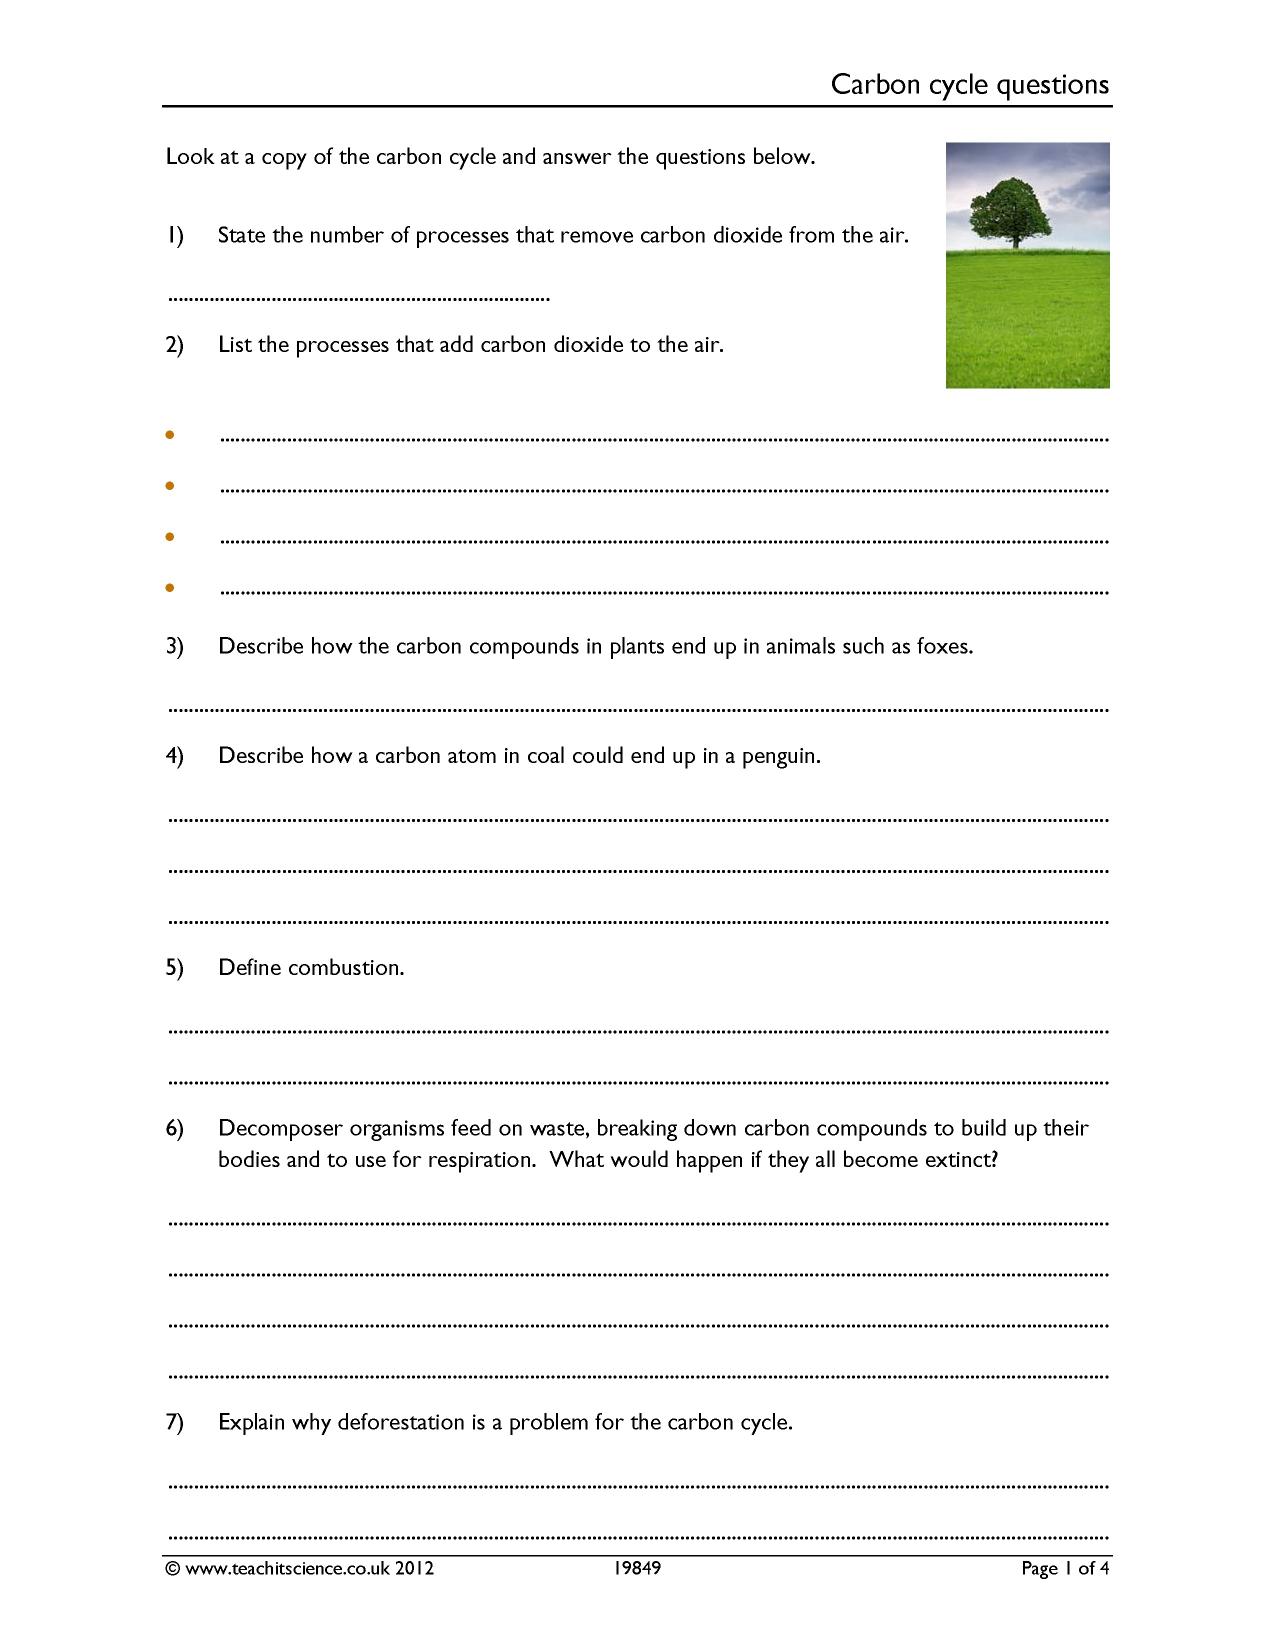 Carbon cycle questions worksheet [pdf] - Teachit Science Within The Carbon Cycle Worksheet Answers